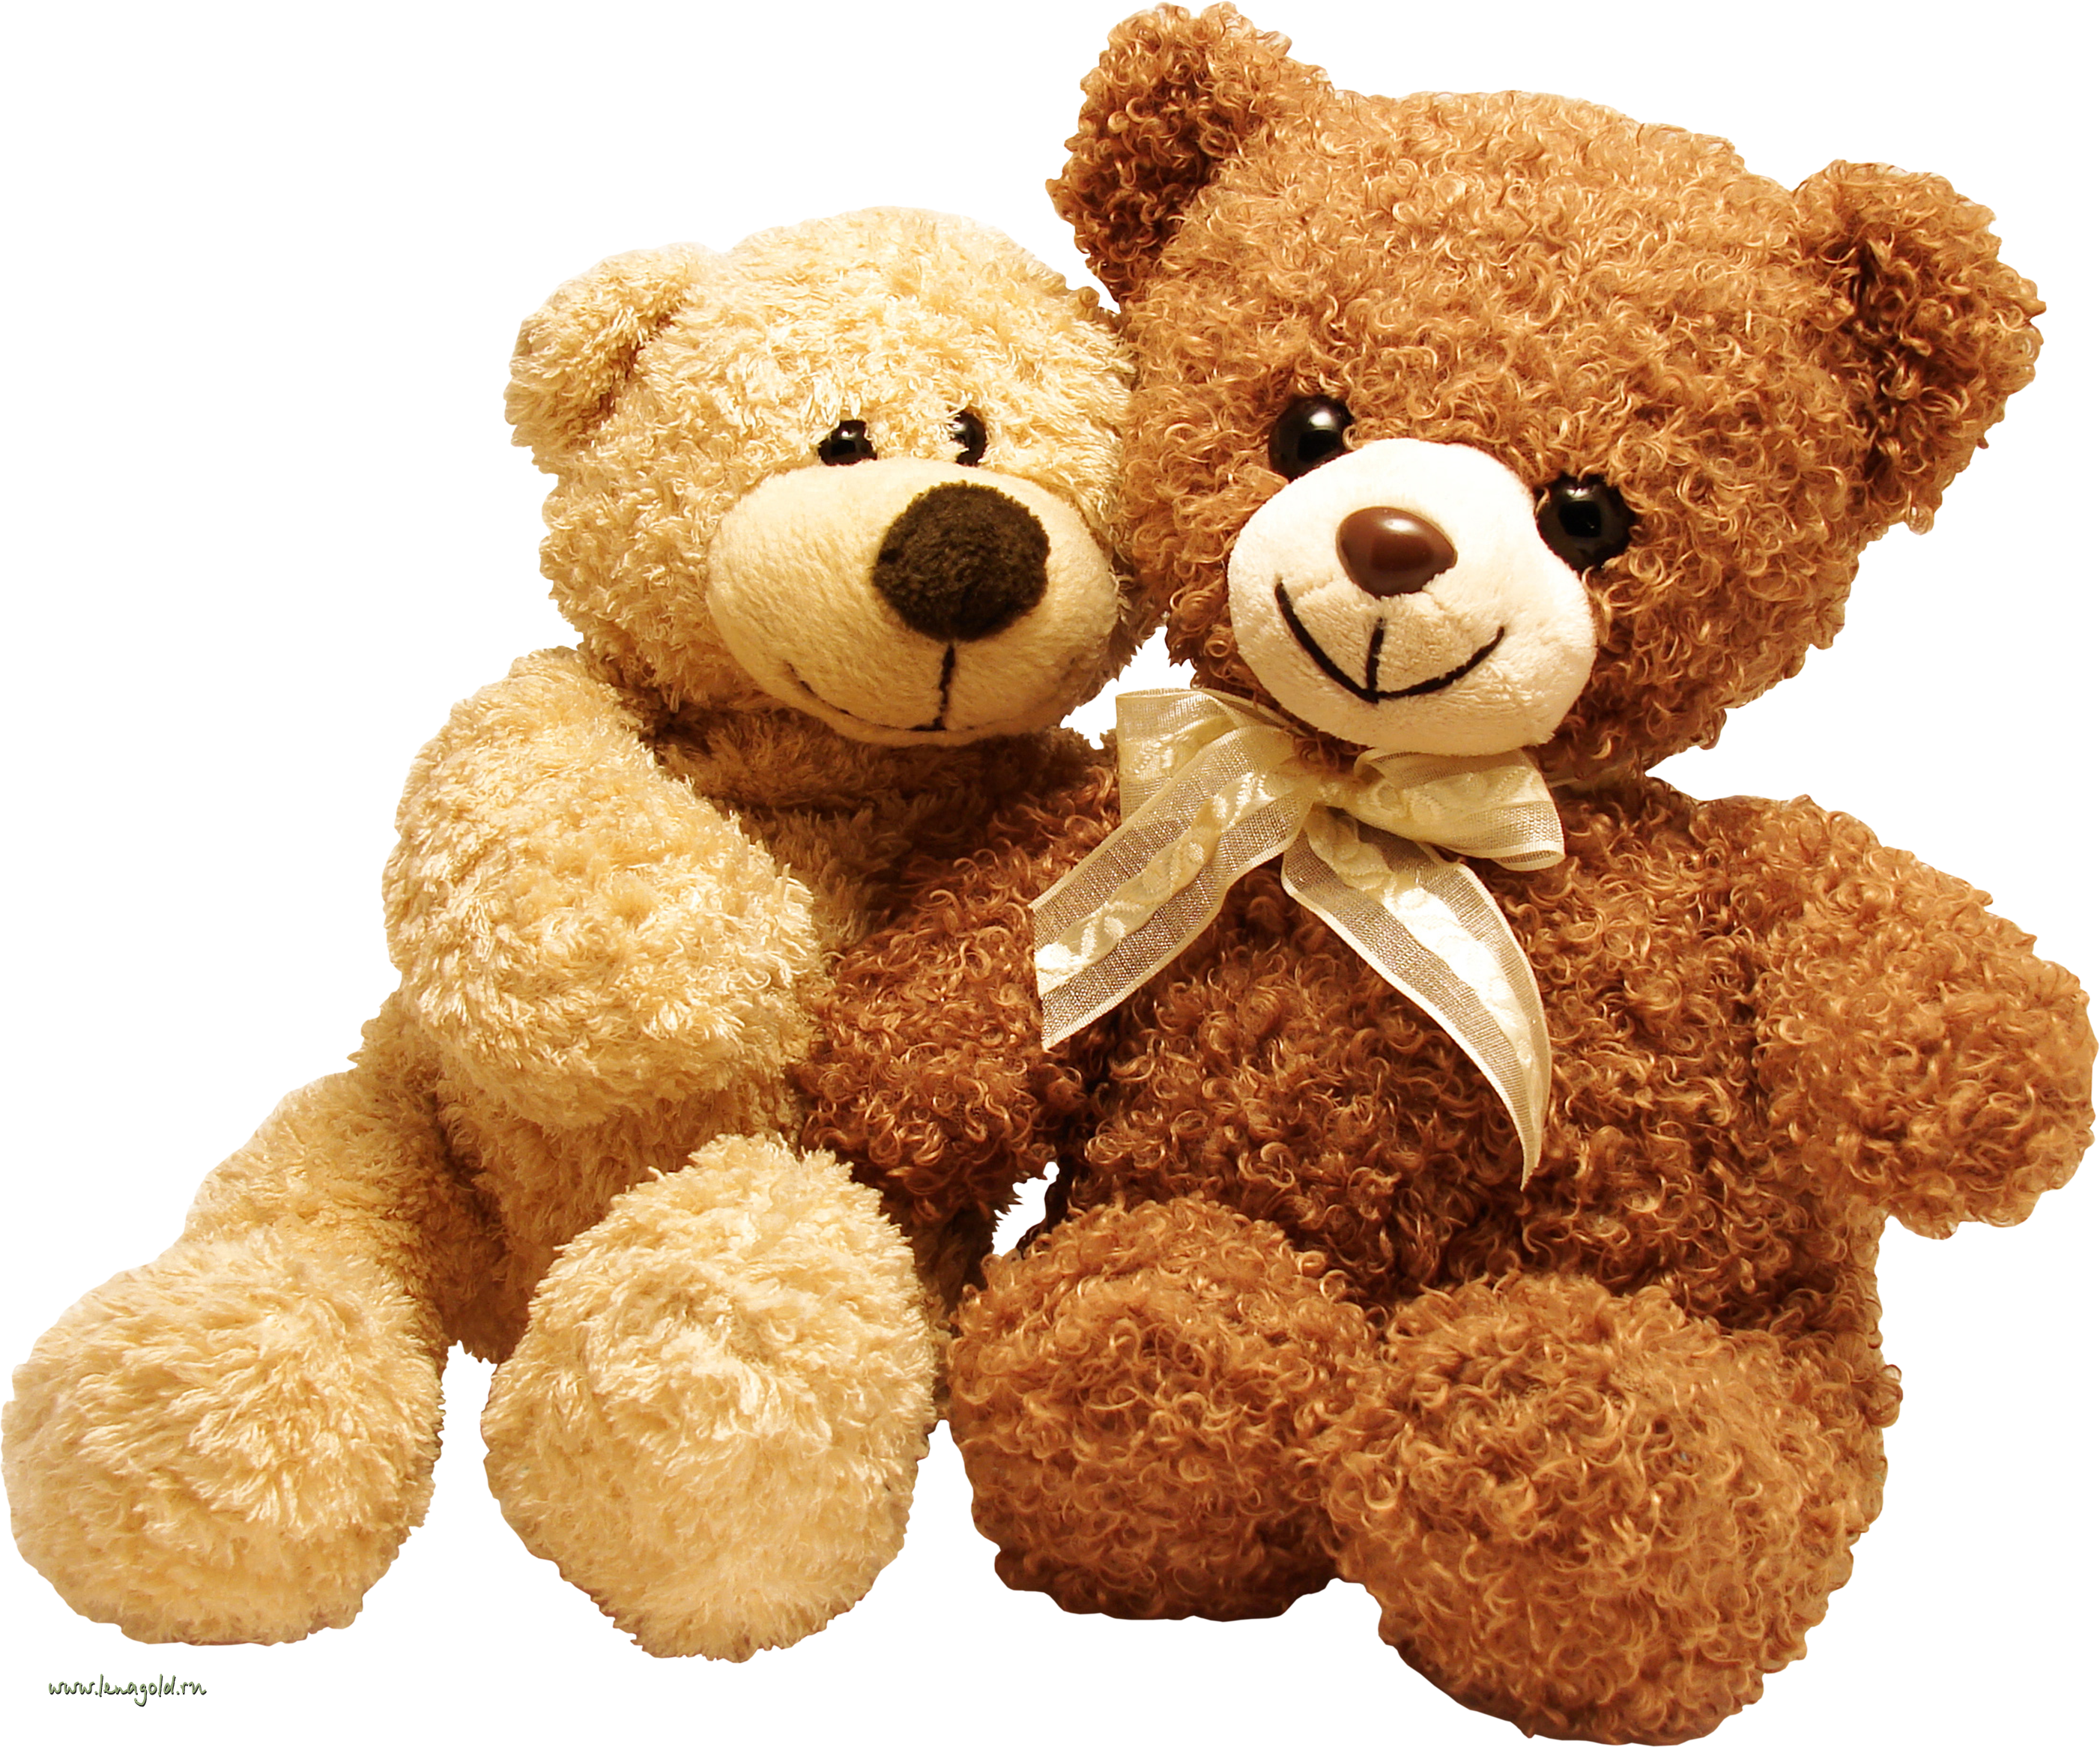 Download PNG image - Teddy Be